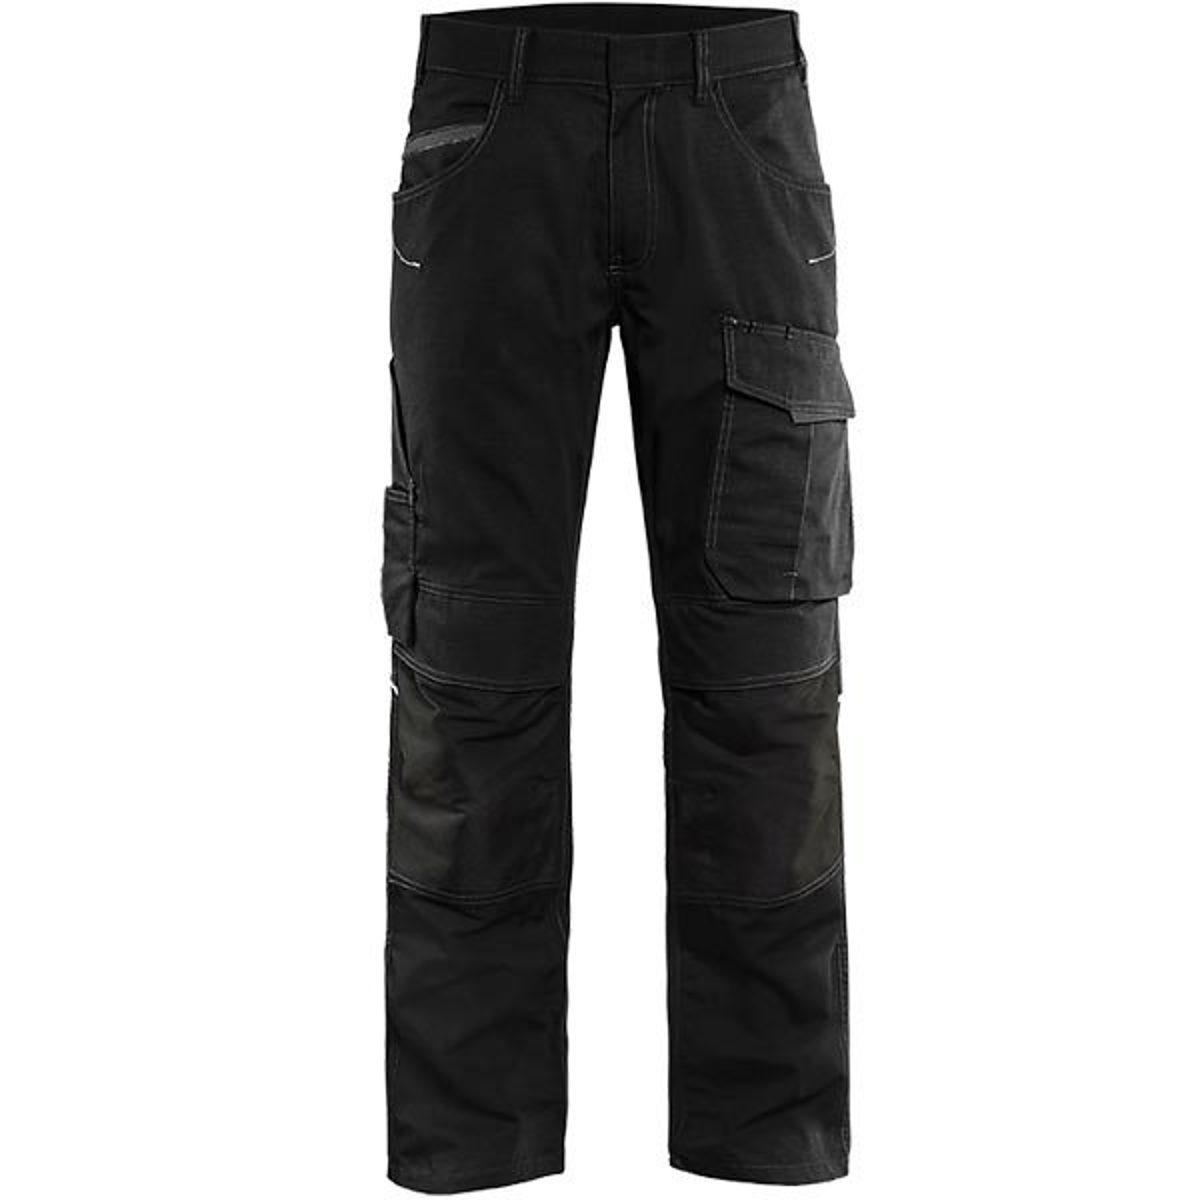 Blakläder trousers ripstop with stretch 1495